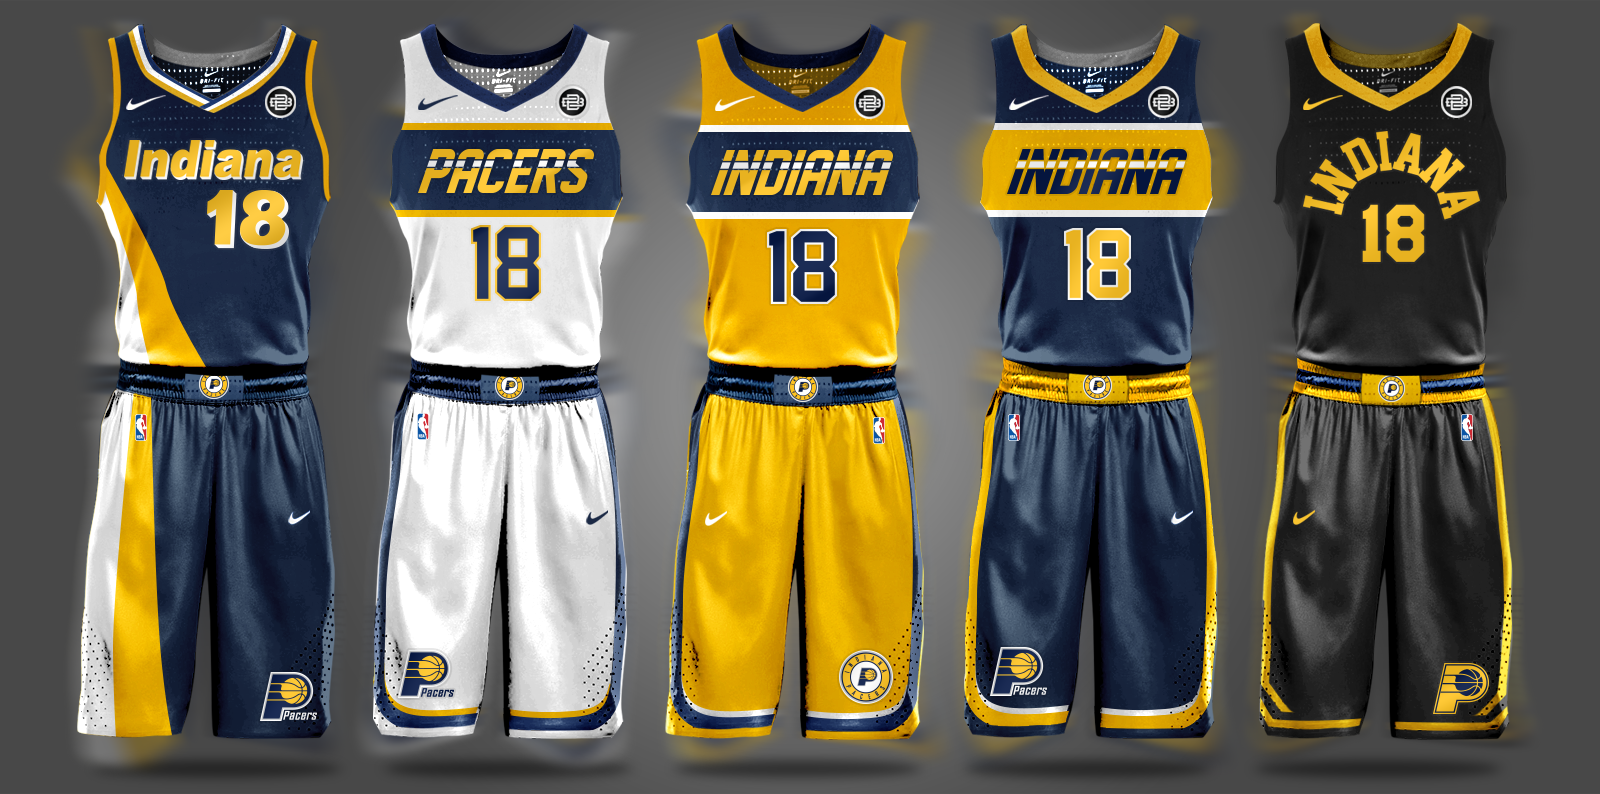 What Makes the New Nike NBA Uniforms So Special? - WearTesters